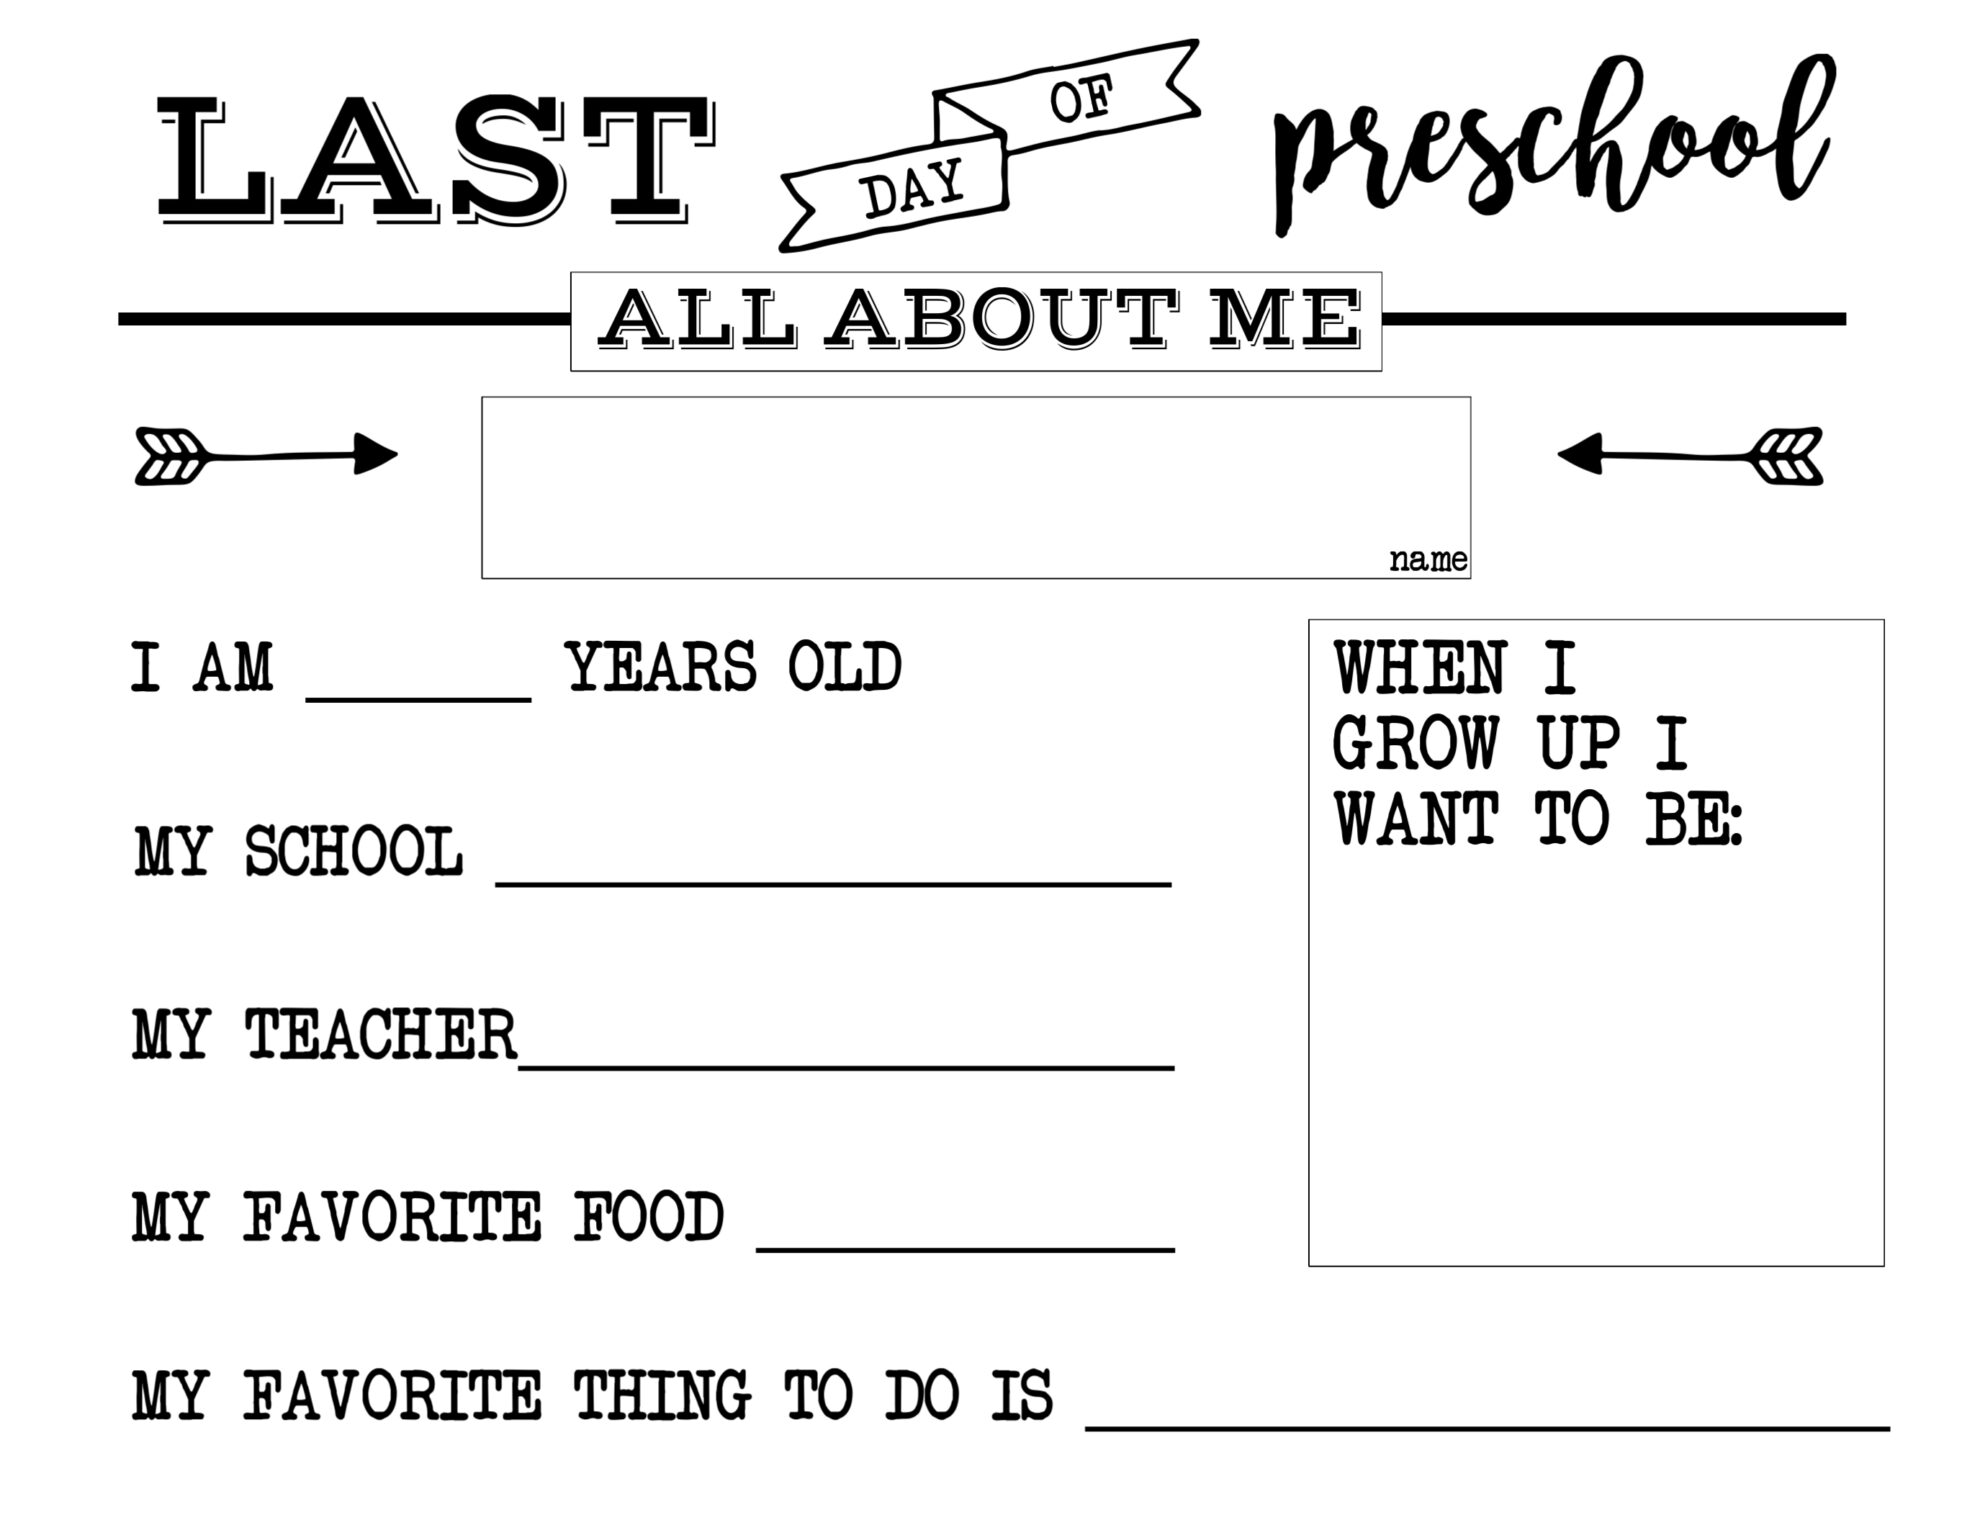 all about me preschool printables